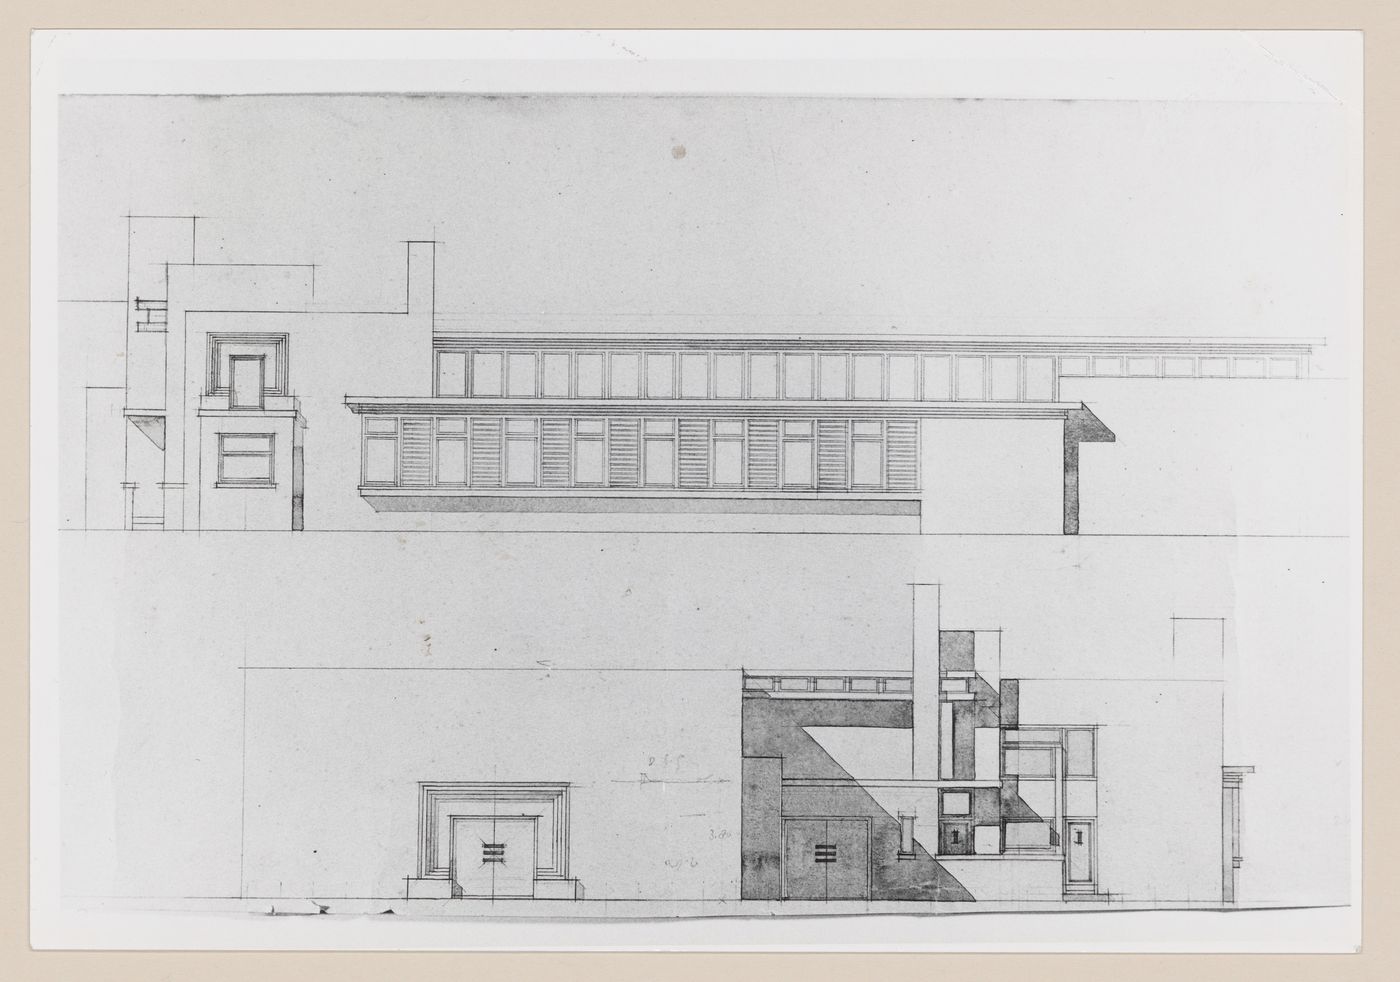 Photograph of lateral and principal elevations for a winery, Purmerend, Netherlands